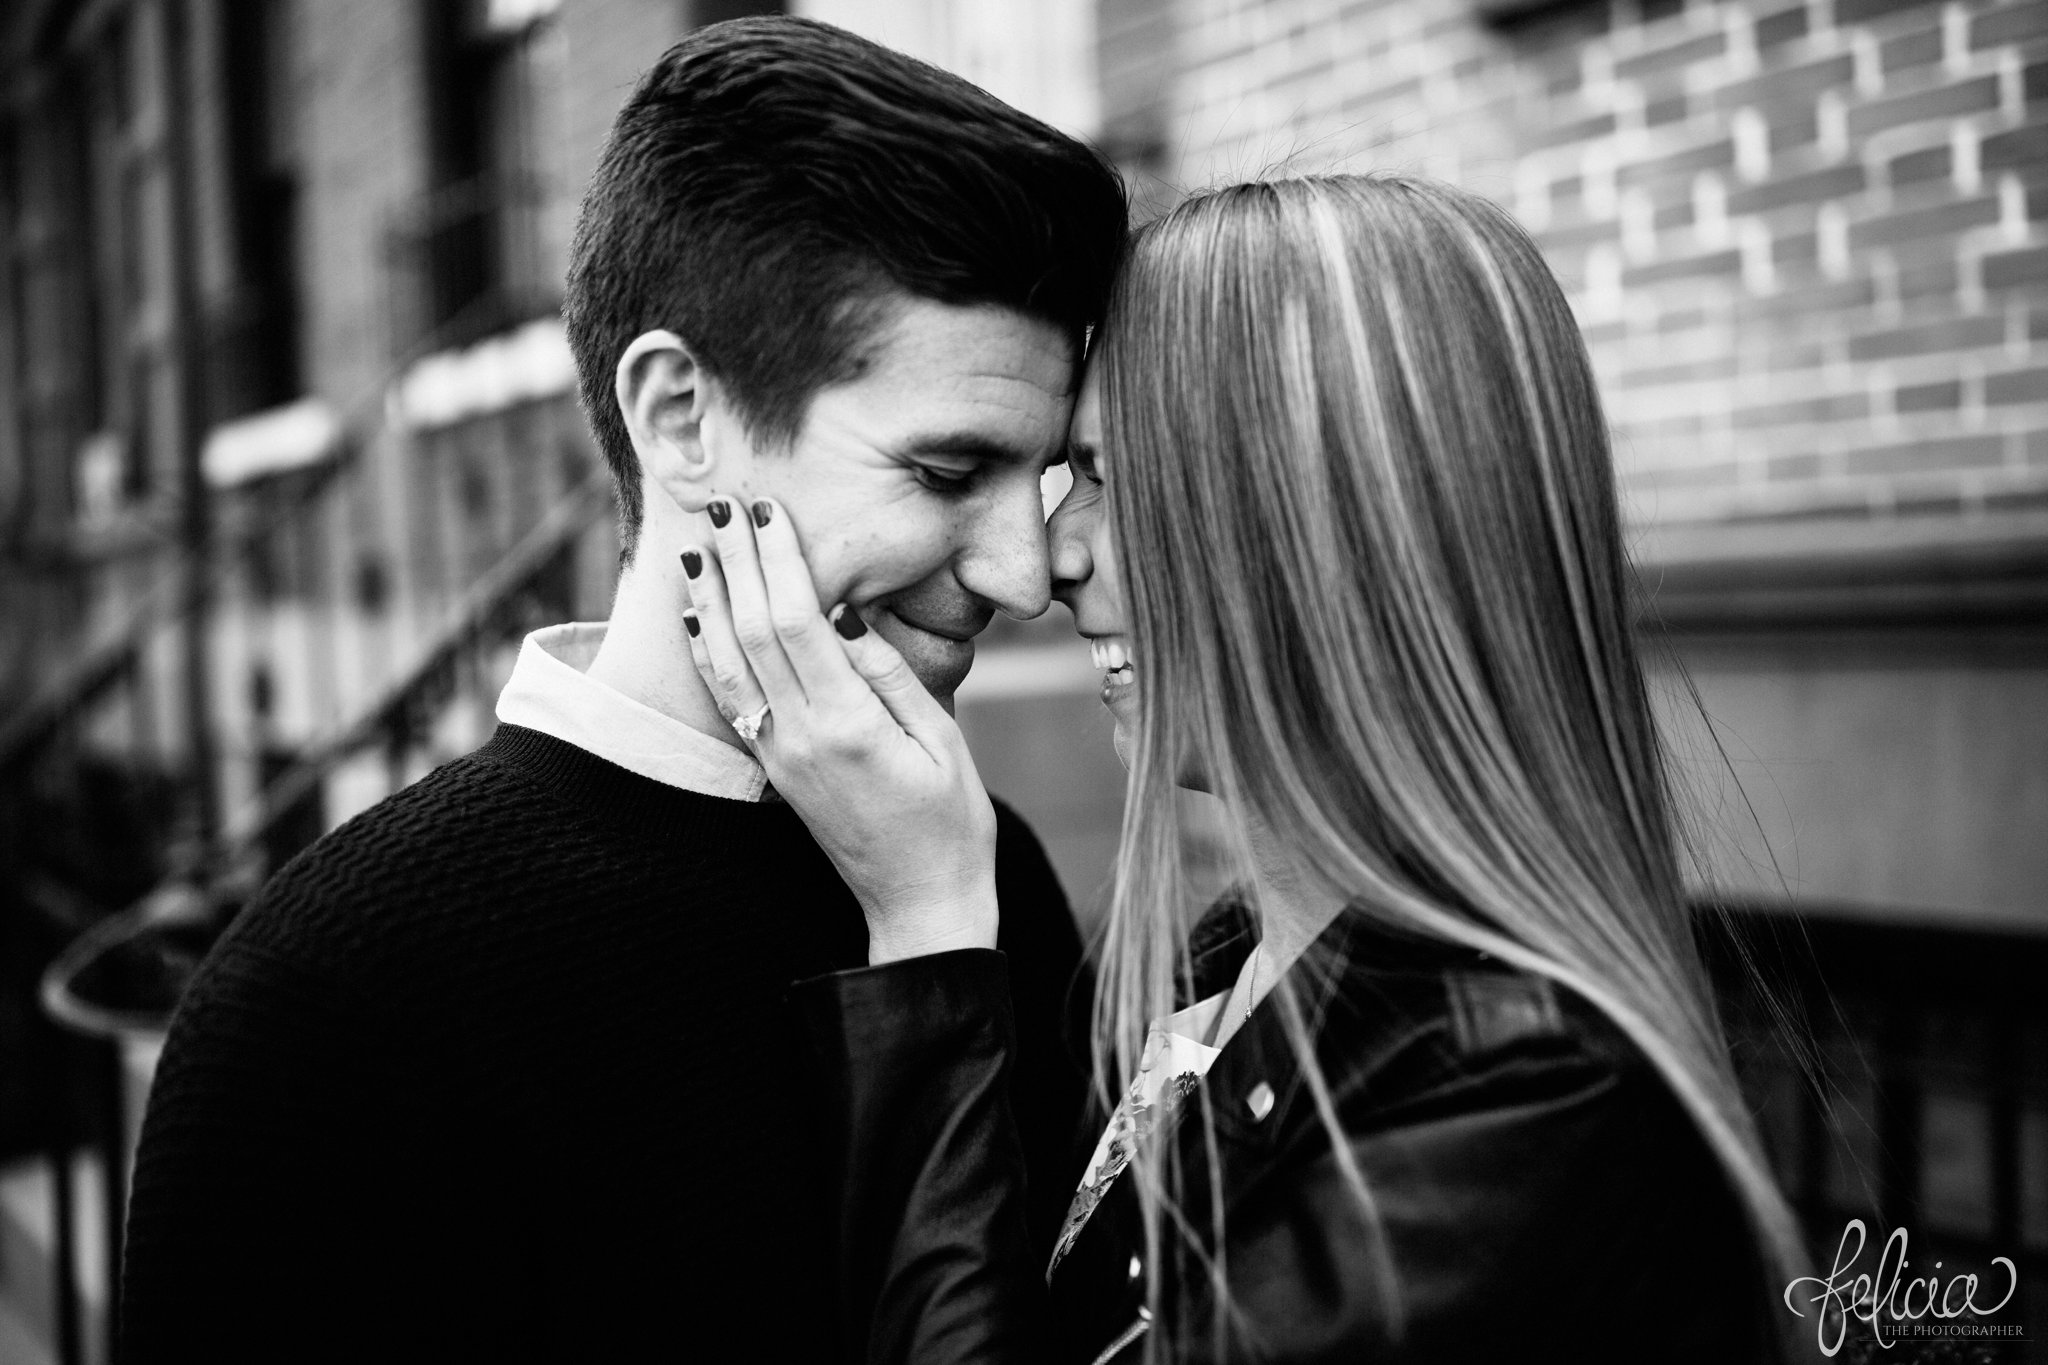 wedding | New York City | West Village | New York City photography | wedding photography | images by feliciathephotographer.com | engagement photos | engagement pictures in New York City | candid | romantic engagement pictures | black and white | brick background | engagement ring | laughing bride 